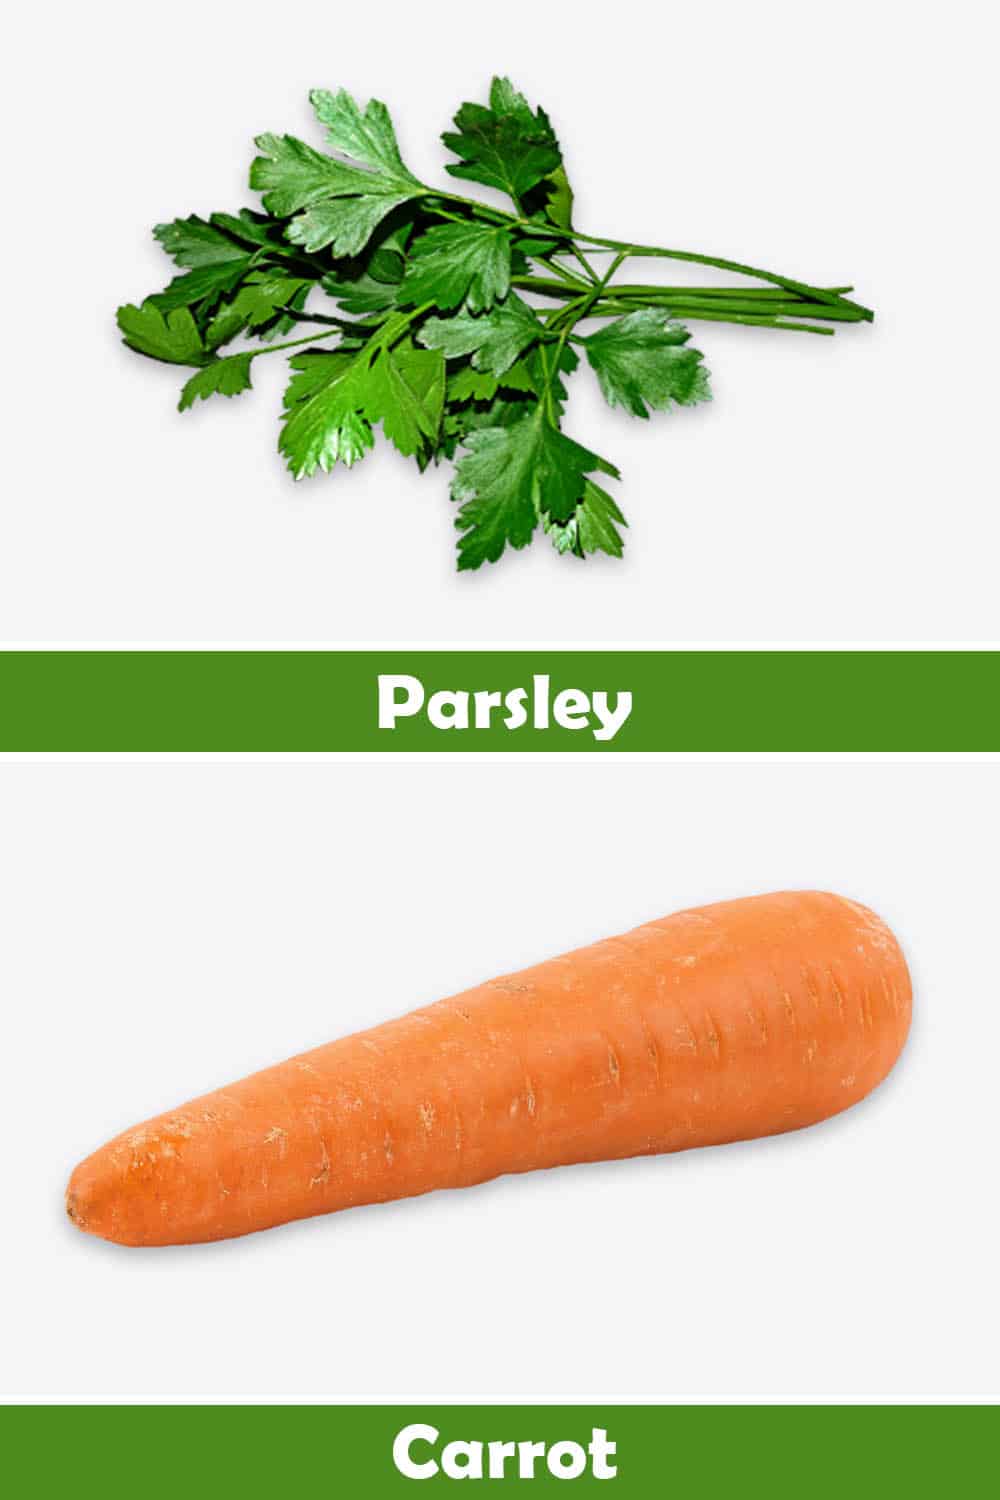 PARSLEY AND CARROT